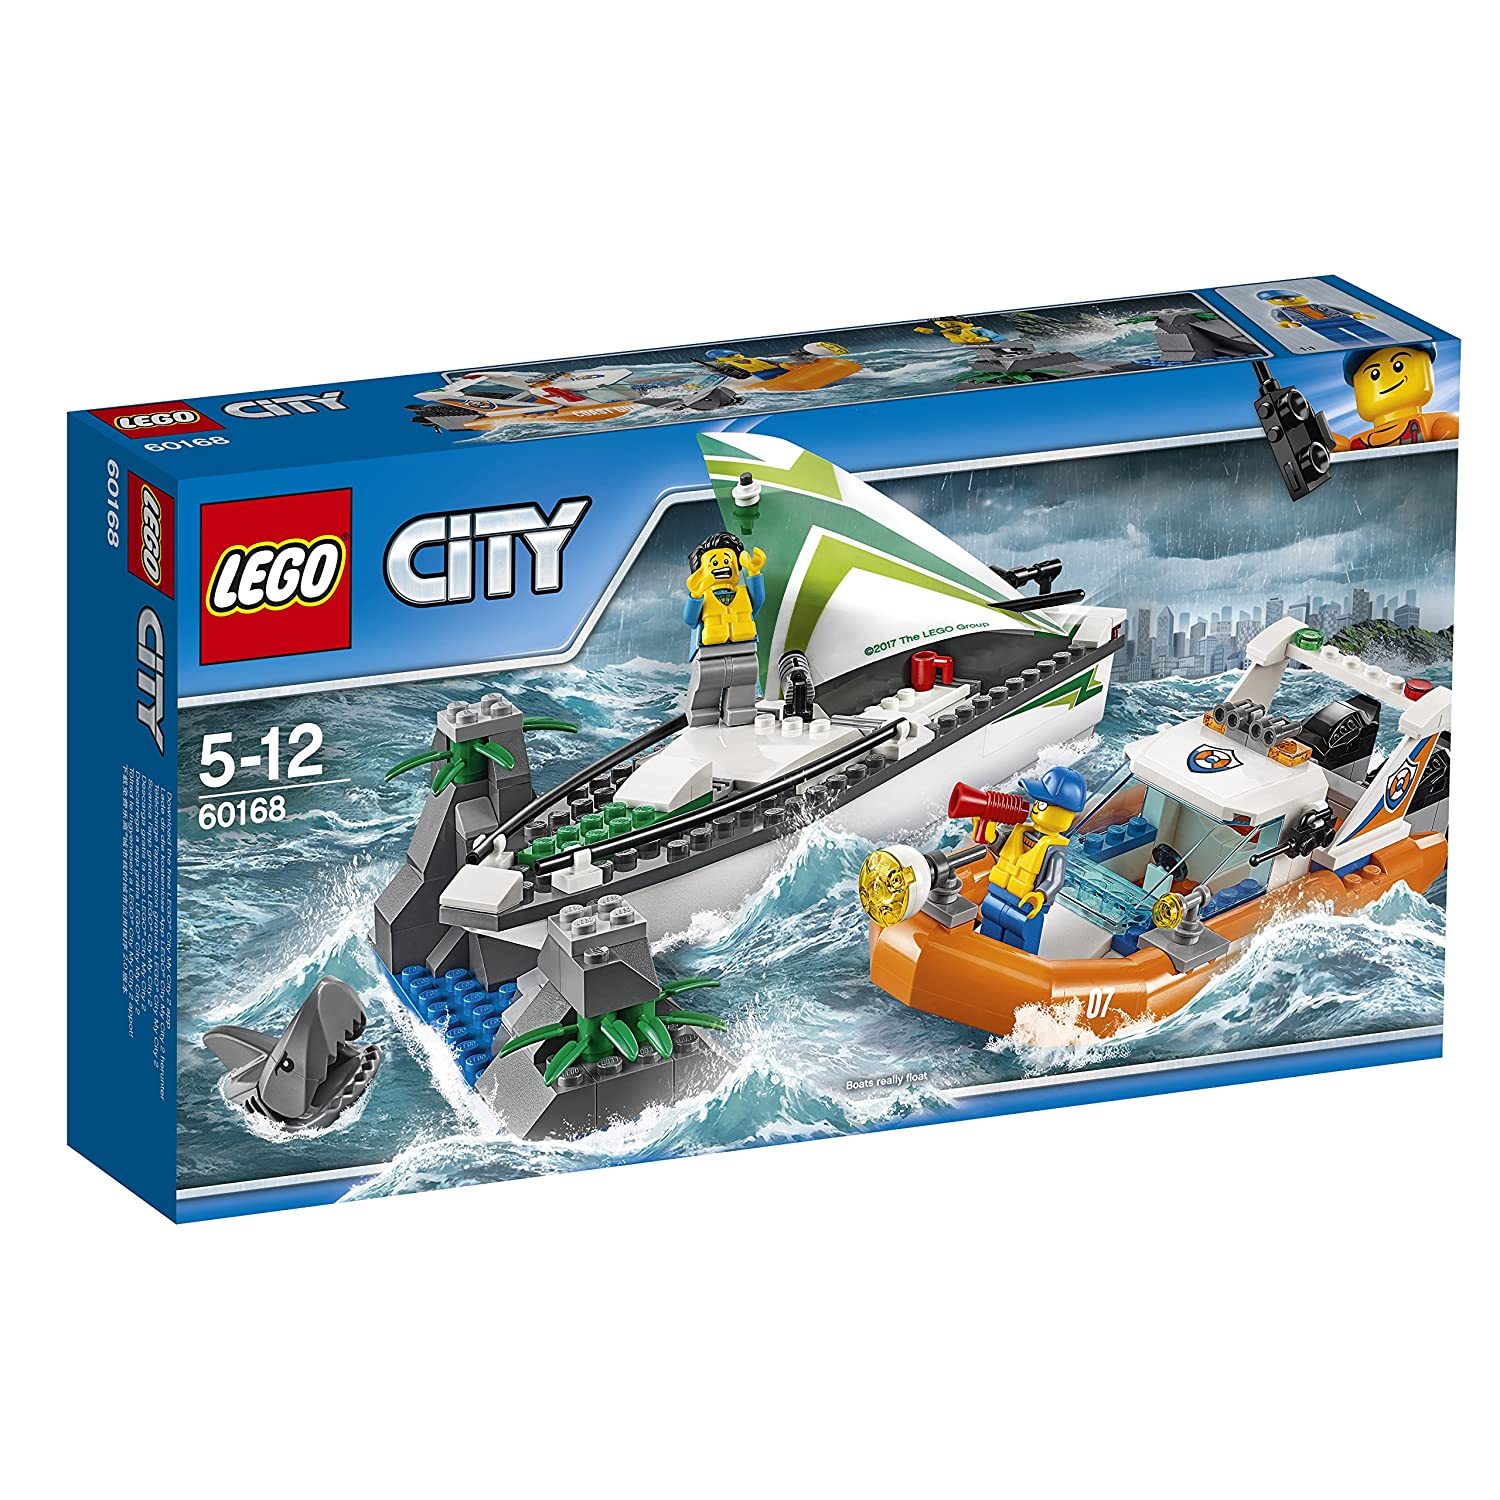 Top 9 Best LEGO Boat Sets Reviews in 2022 5